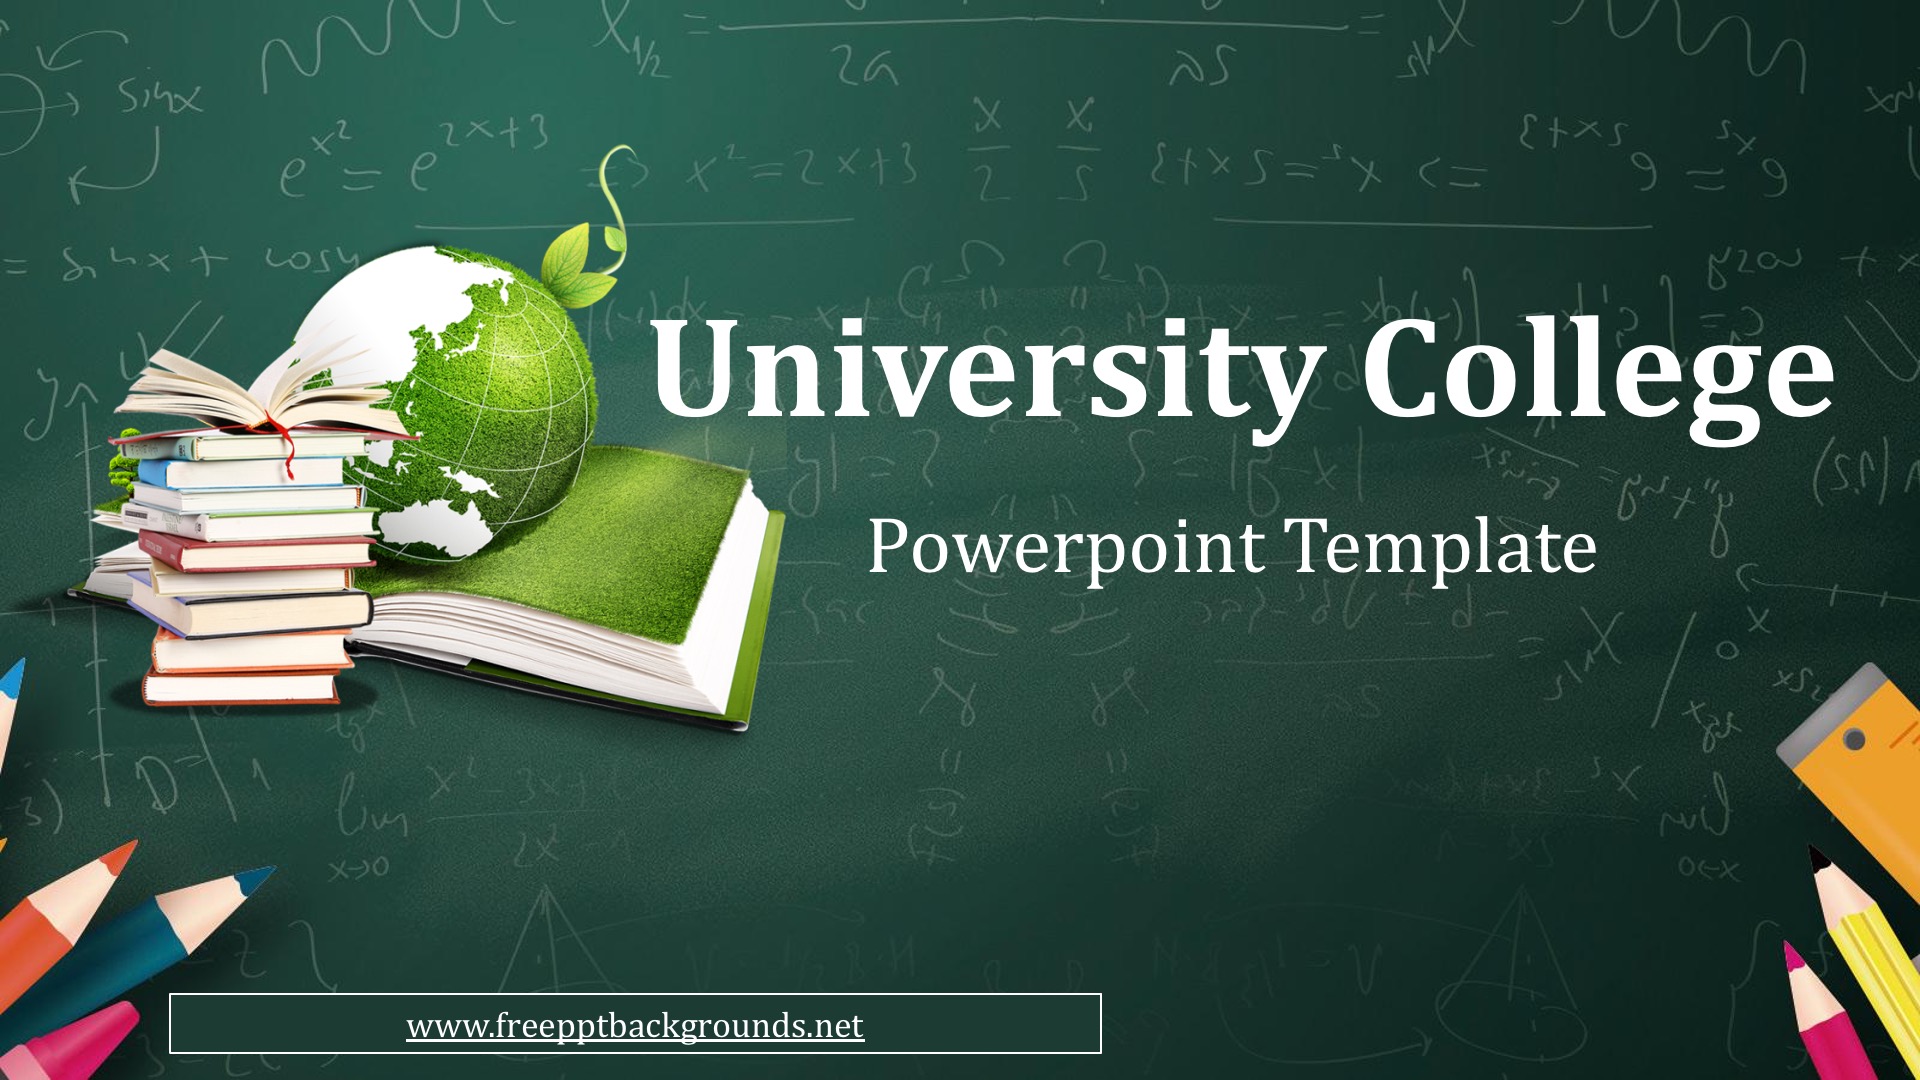 powerpoint template for academic presentation